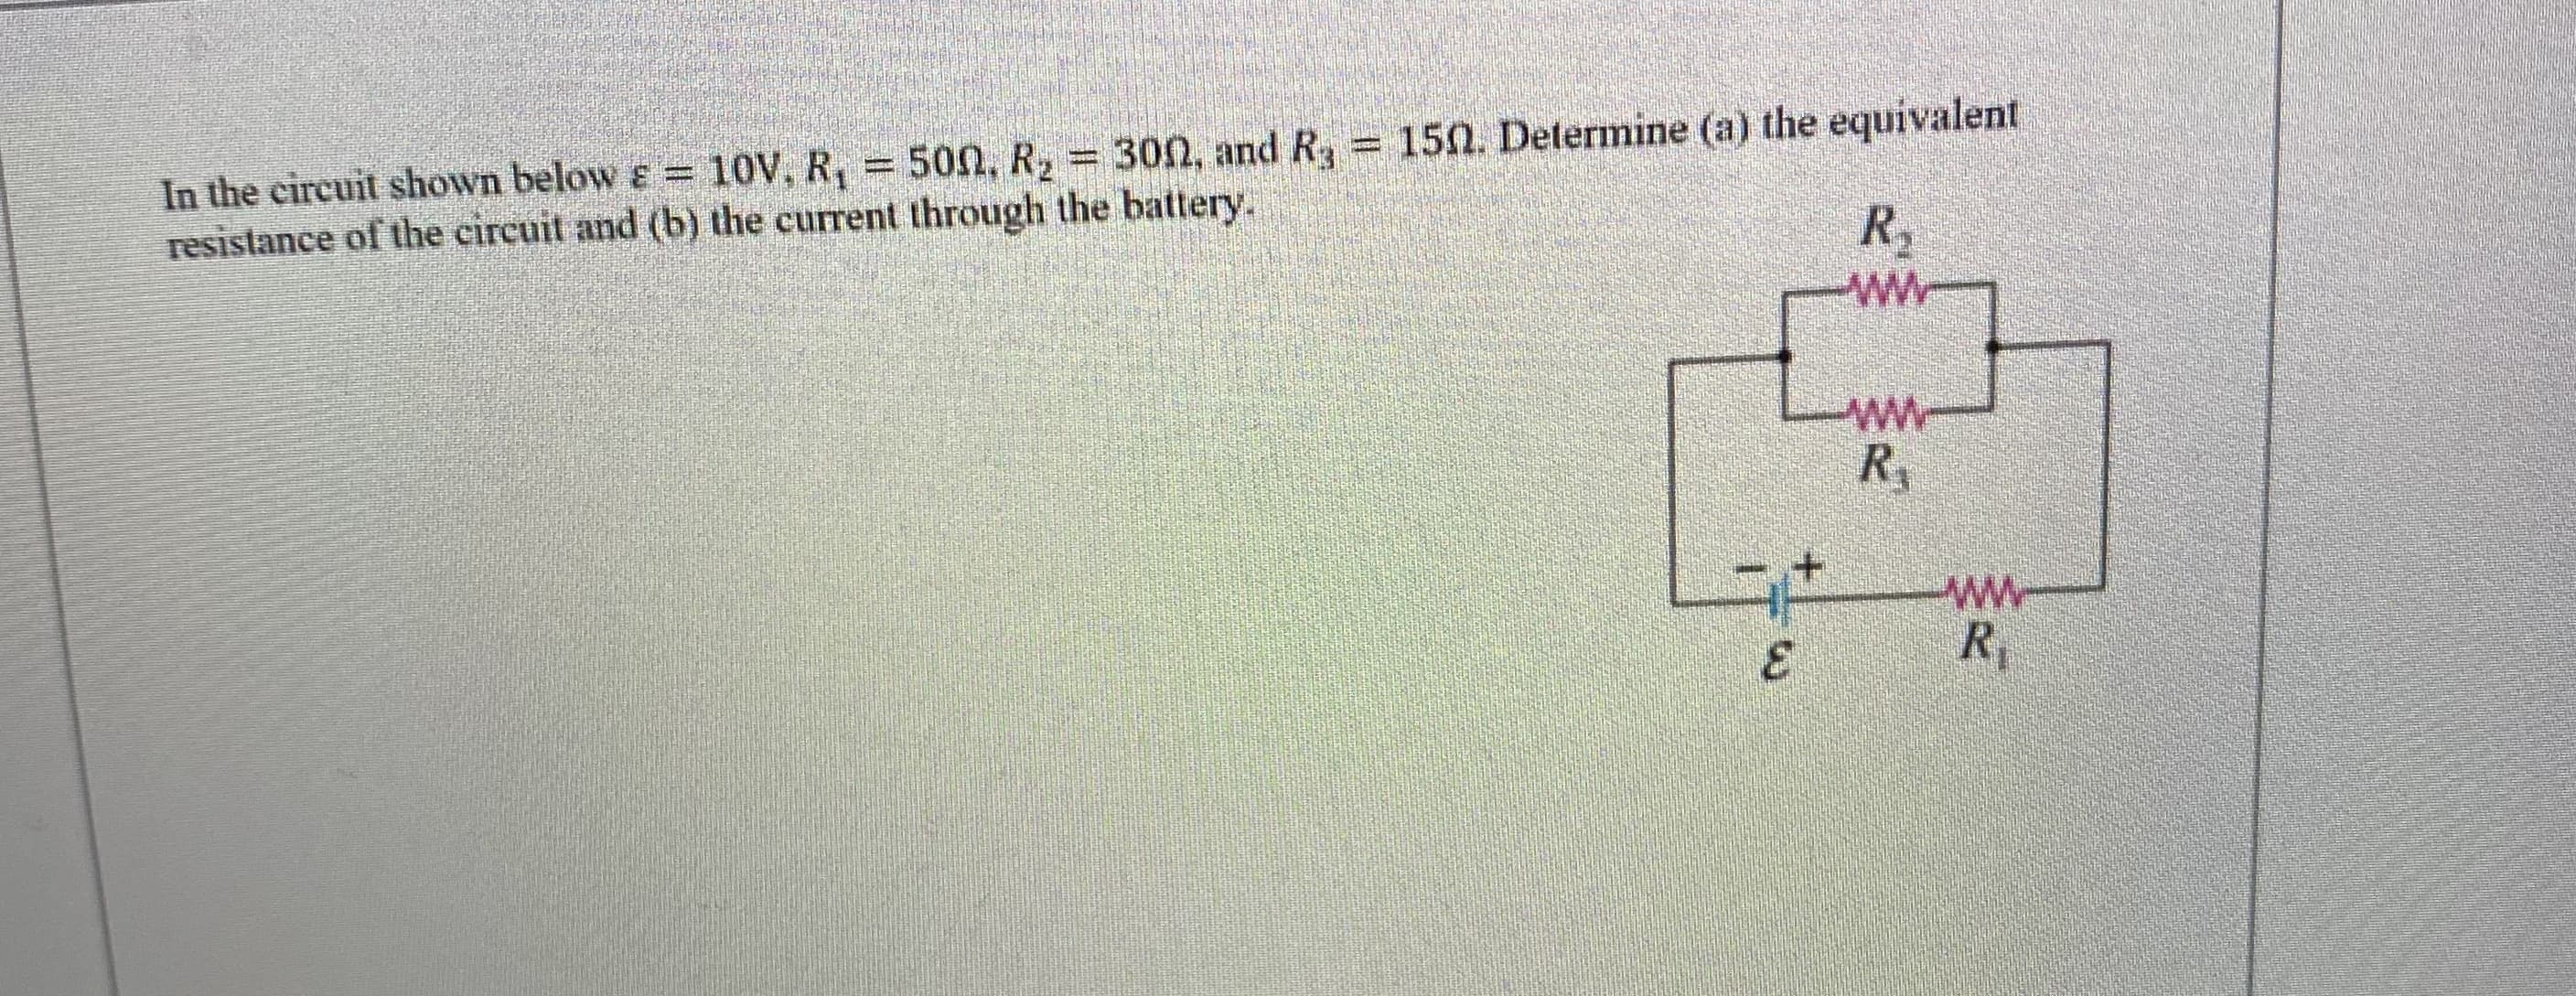 150. Determine (a) the equivalent
In the circuit shown below & = 10V, R, = 50n, R2
resistance of the circuit and (b) the current through the battery.
= 300, and R
R,
wW-
ww-
R,
ww-
3.
R,
